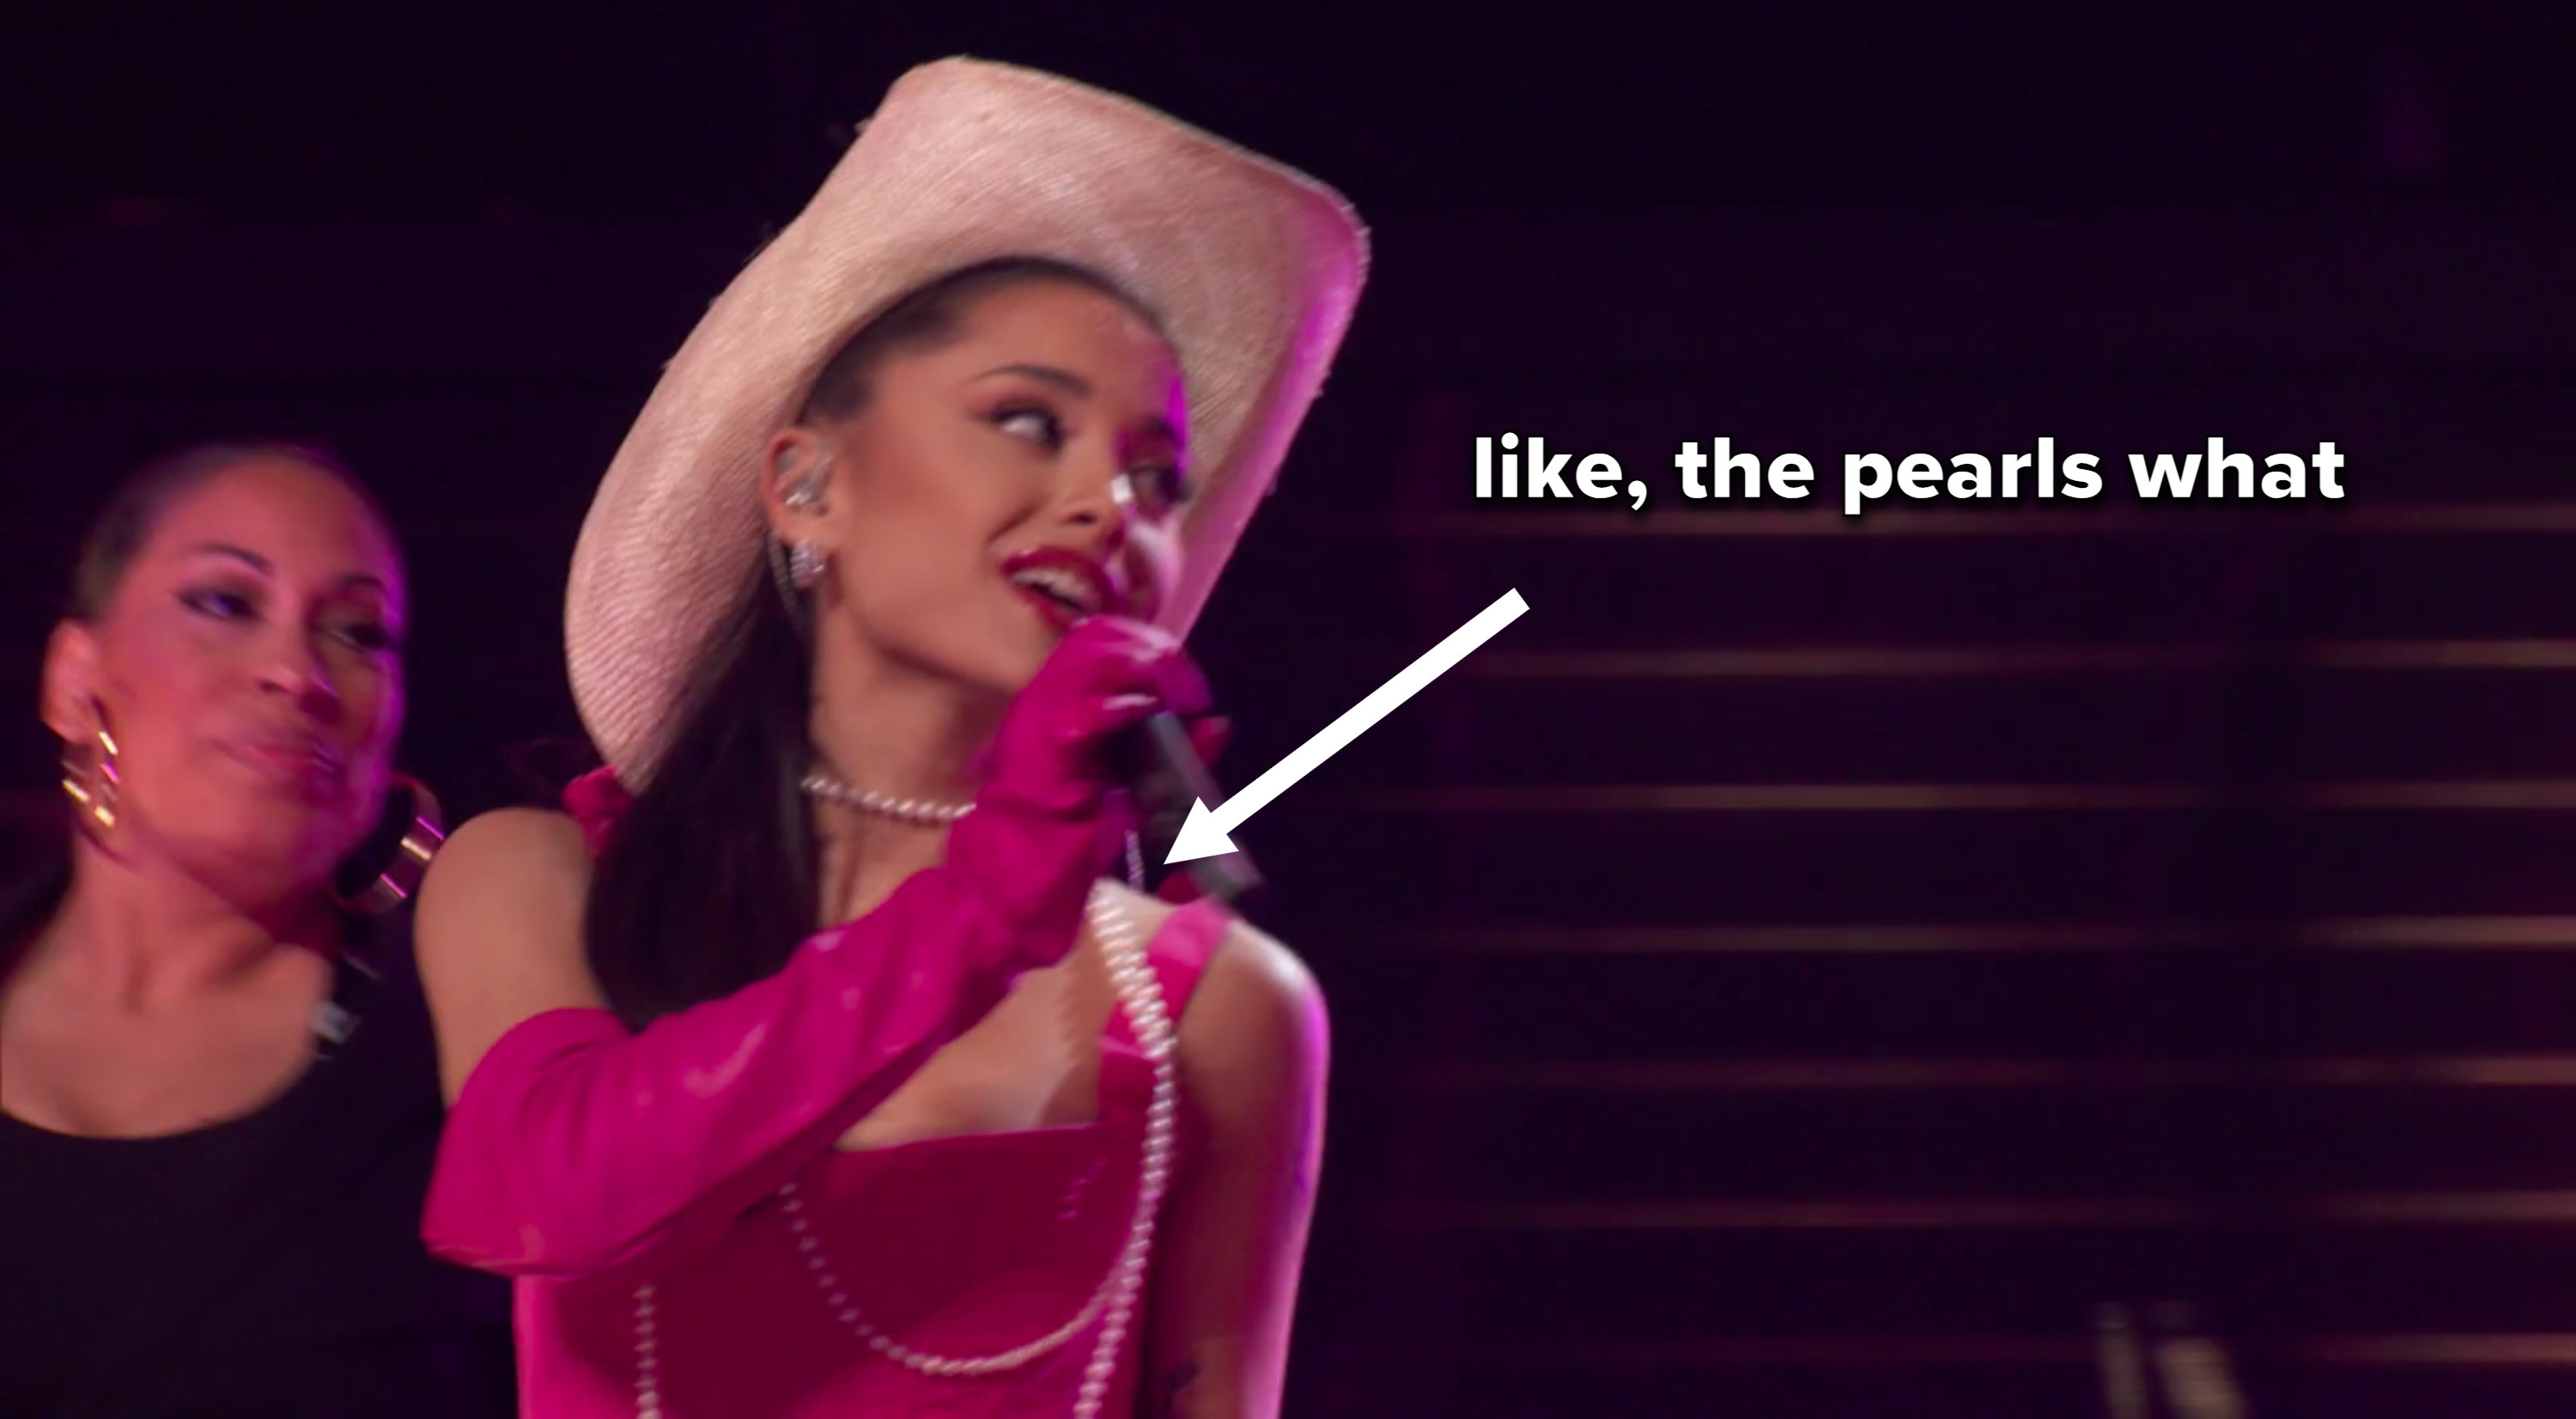 Ariana singing, with an arrow pointing from the caption &quot;like, the pearls what&quot; to the pearls she&#x27;s wearing